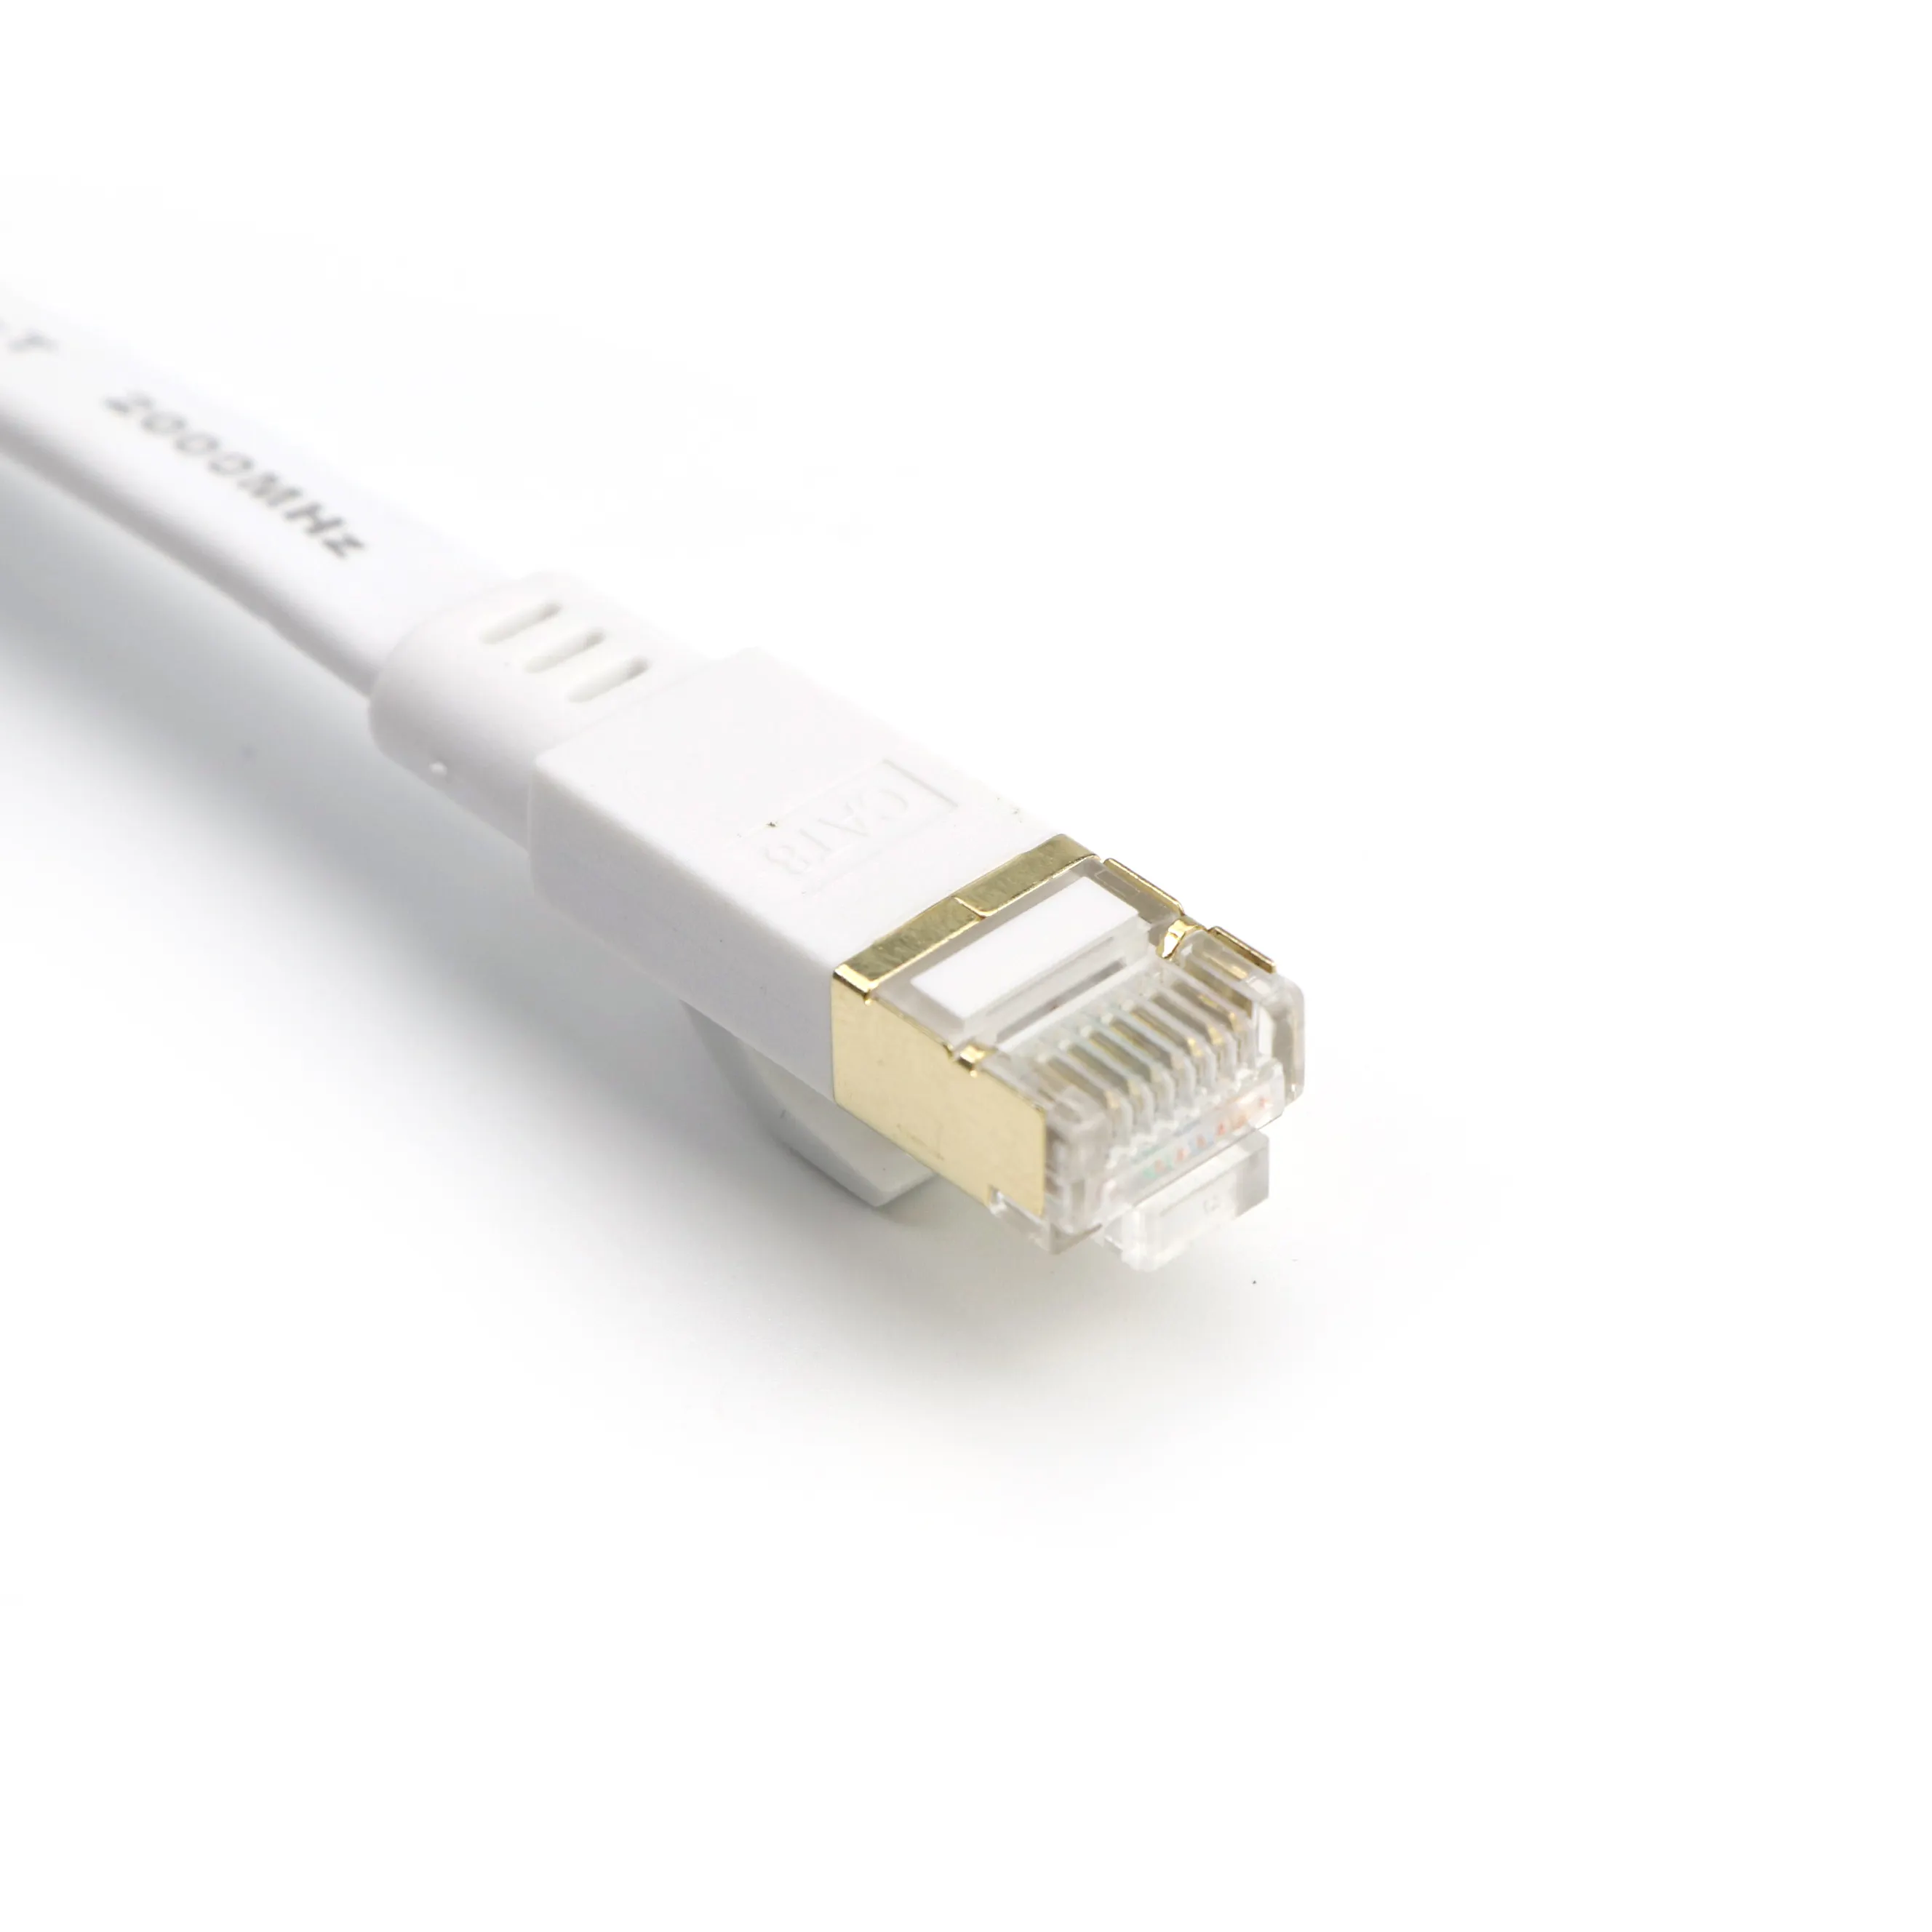 Cat7 Cat8 Network Cable Cat 7 Cabing Network Cat 8 for networking